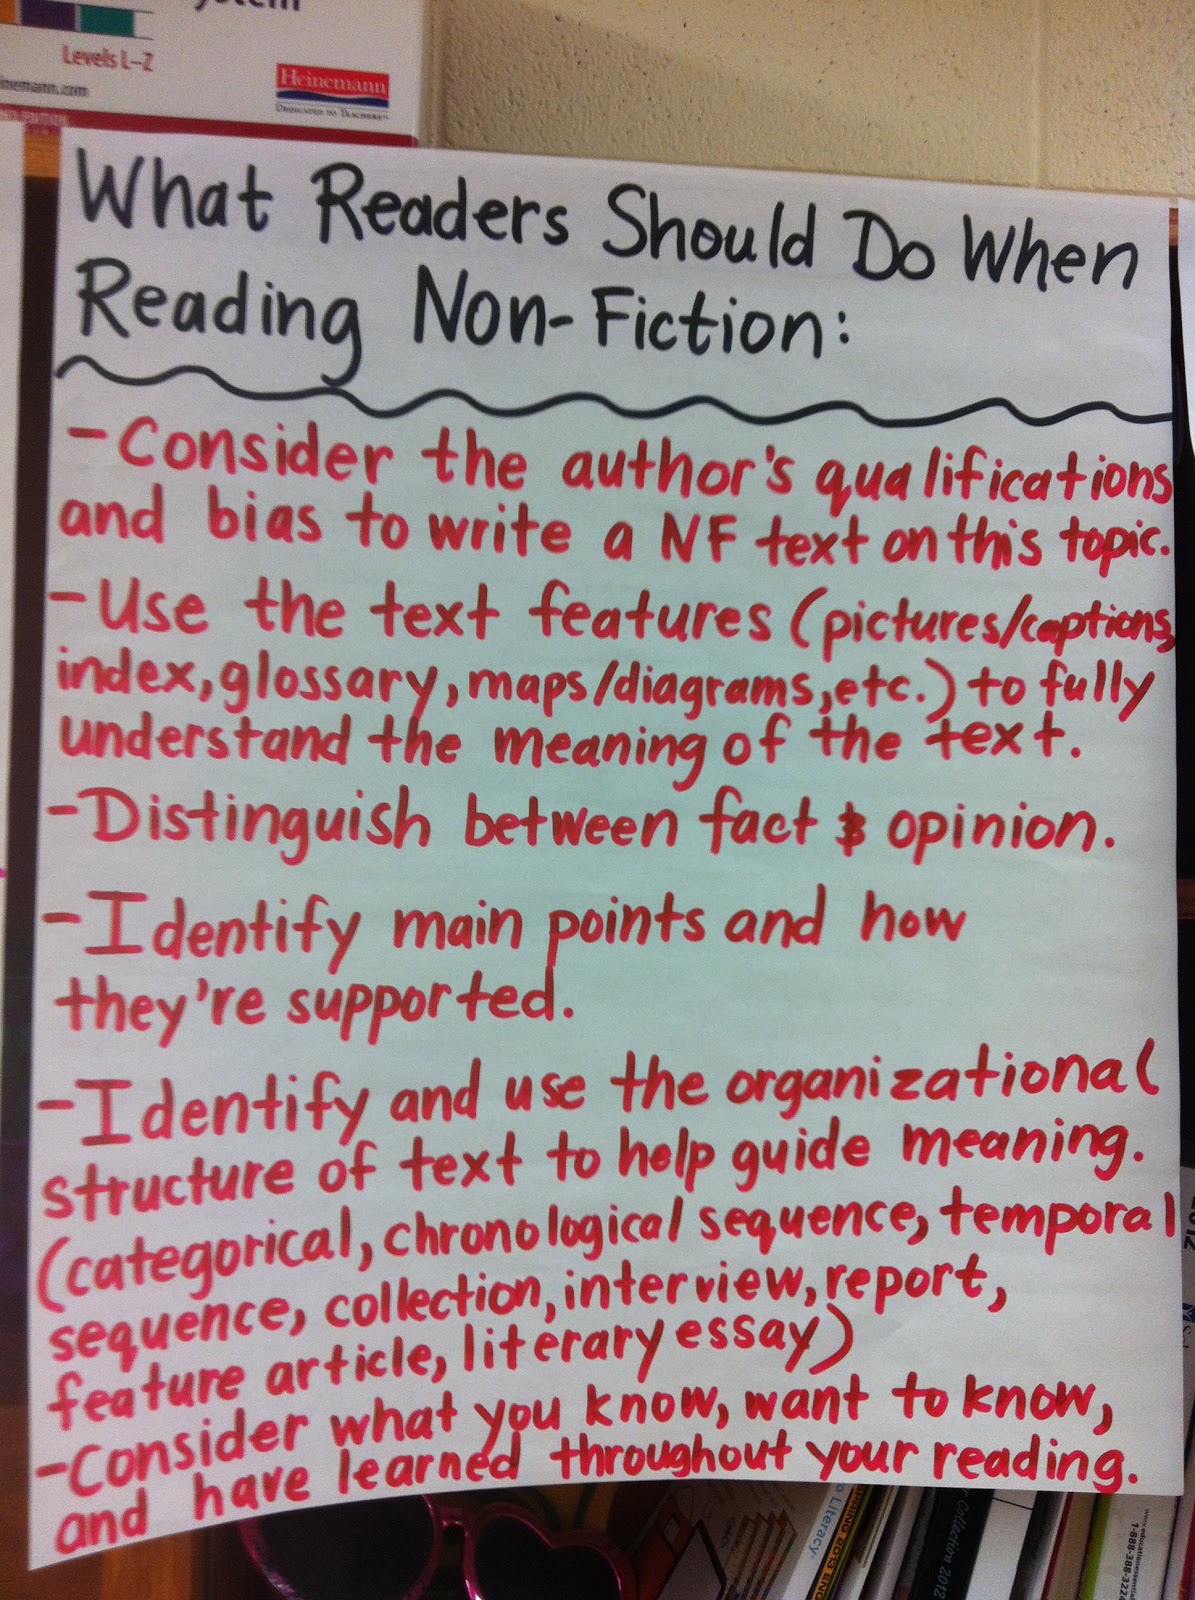 Literacy Loves Company: Are Anchor Charts Weighing You down?